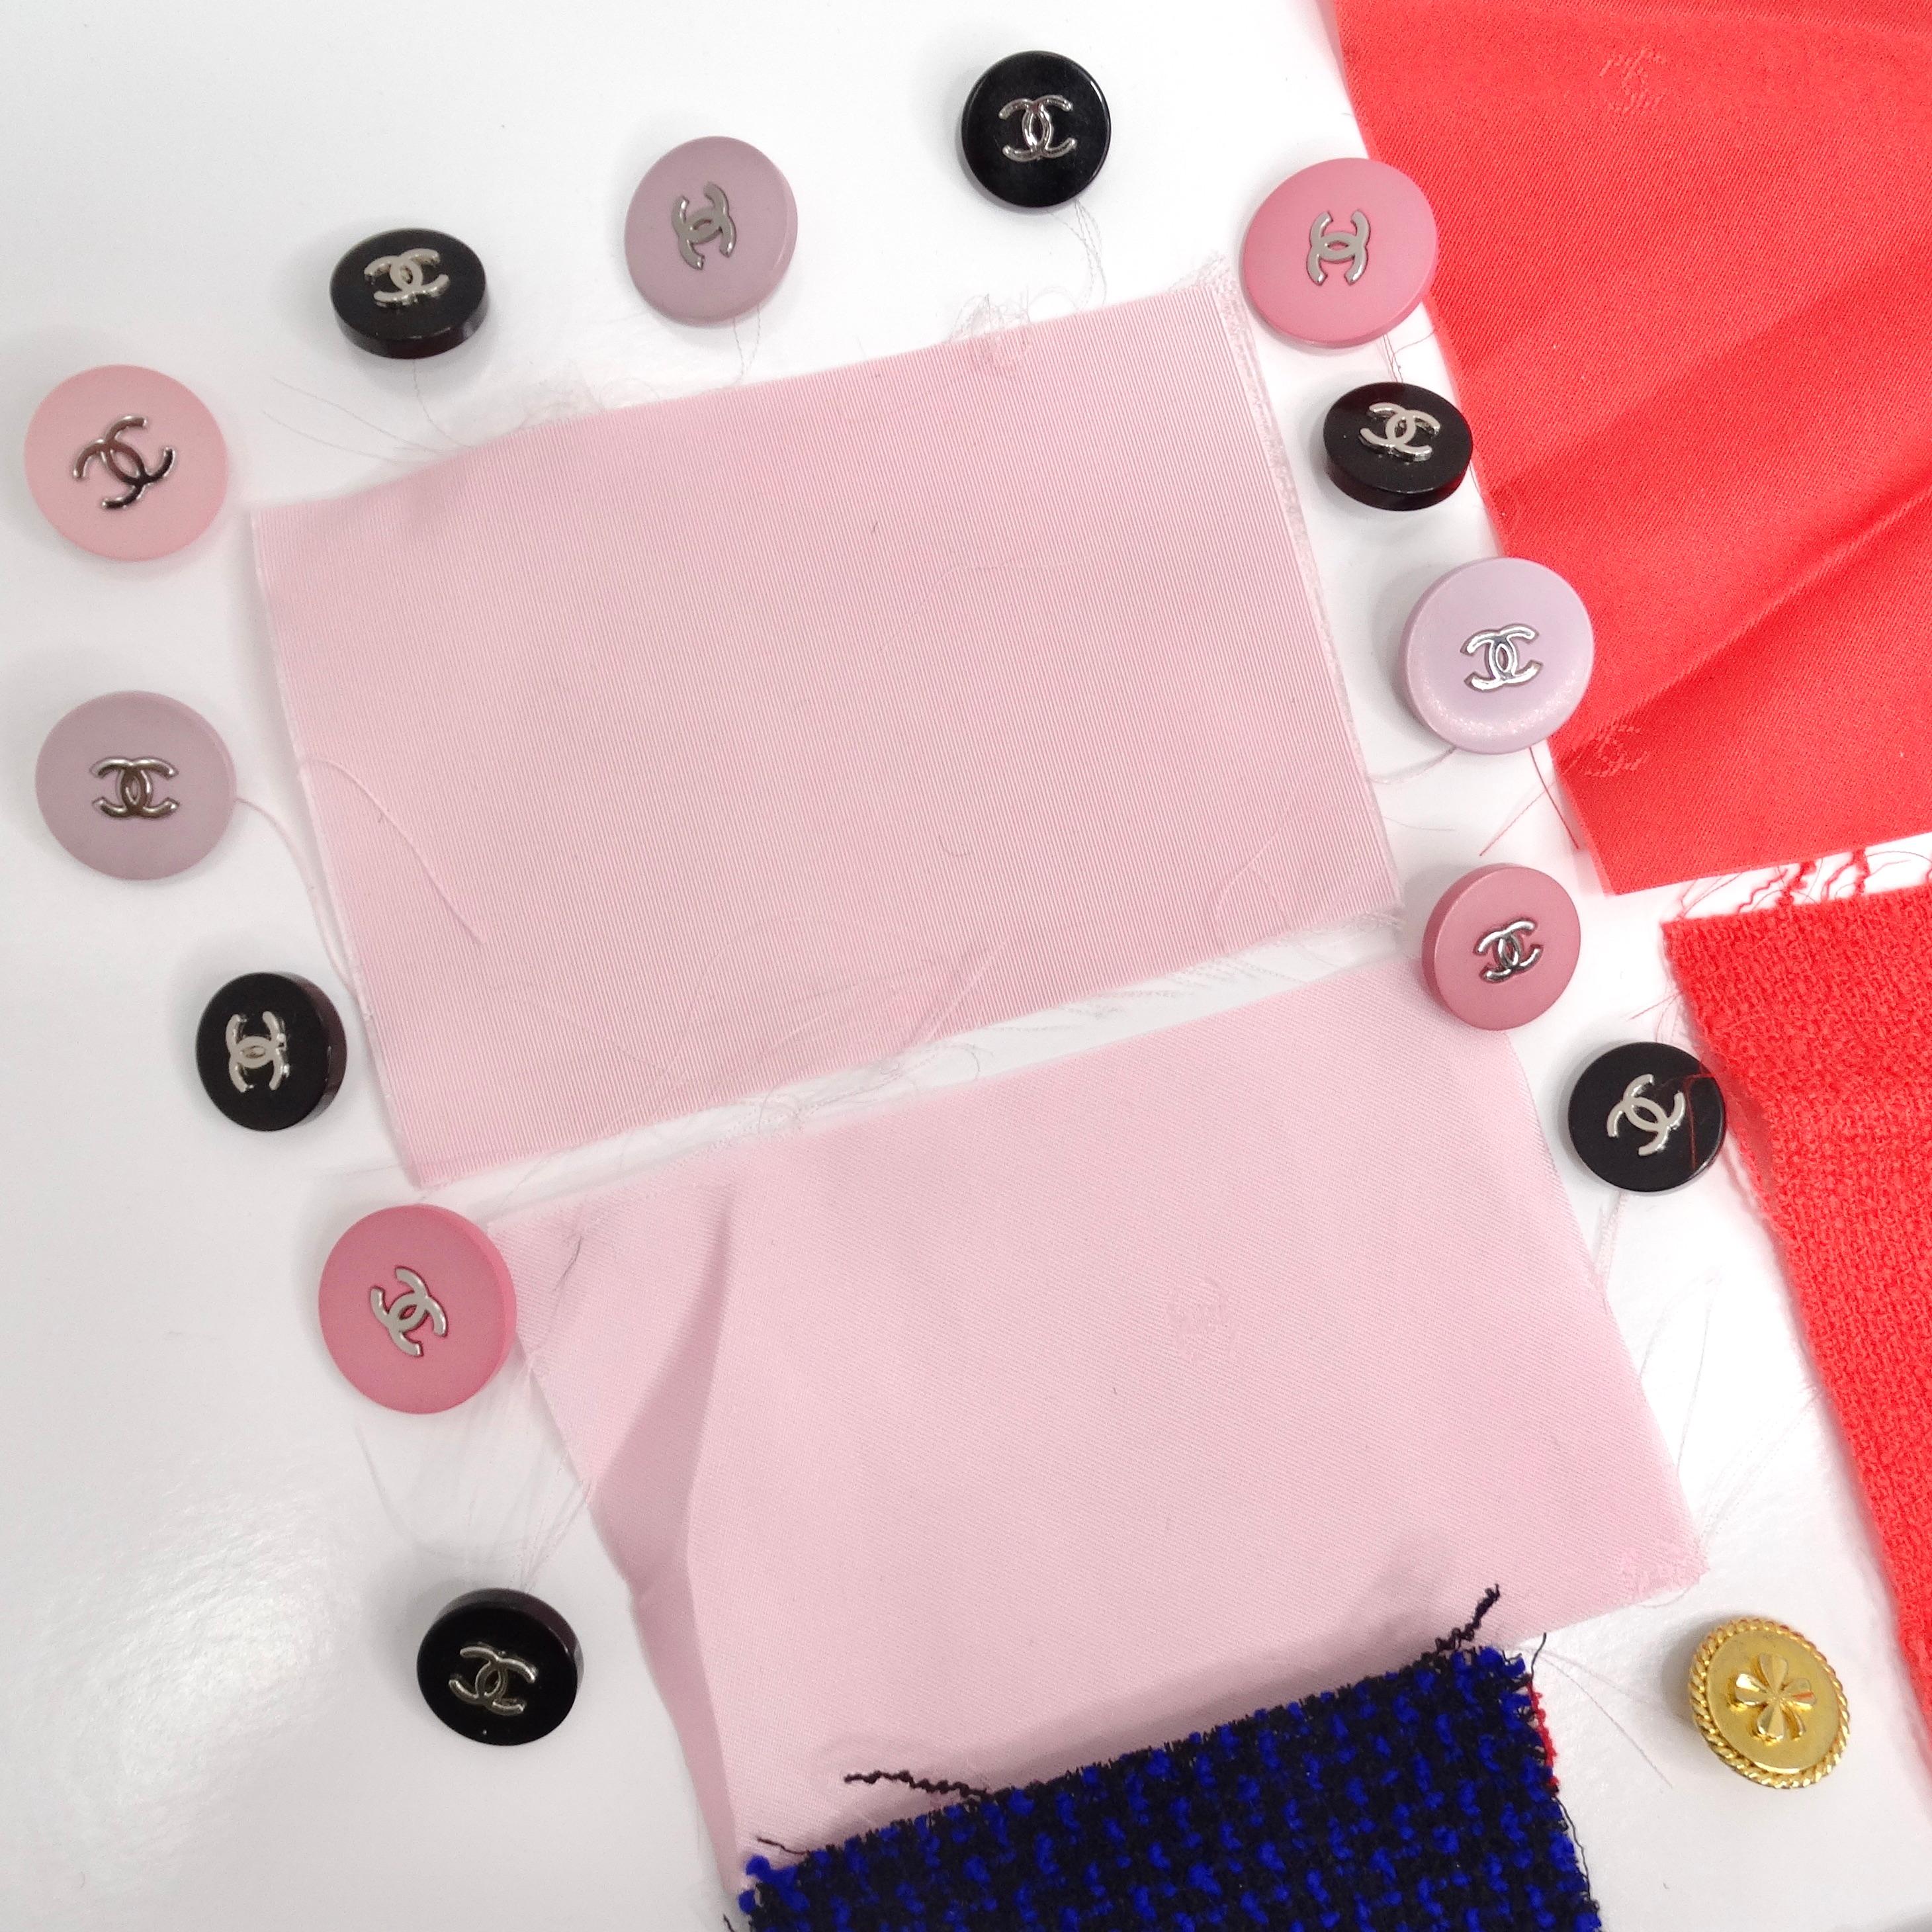 Introducing the exquisite Chanel 1980s and 90s Set of 21 Buttons, a must-have collection for Chanel enthusiasts and collectors alike. This set includes 21 iconic Chanel buttons, along with 6 fabric scraps, providing the perfect materials for